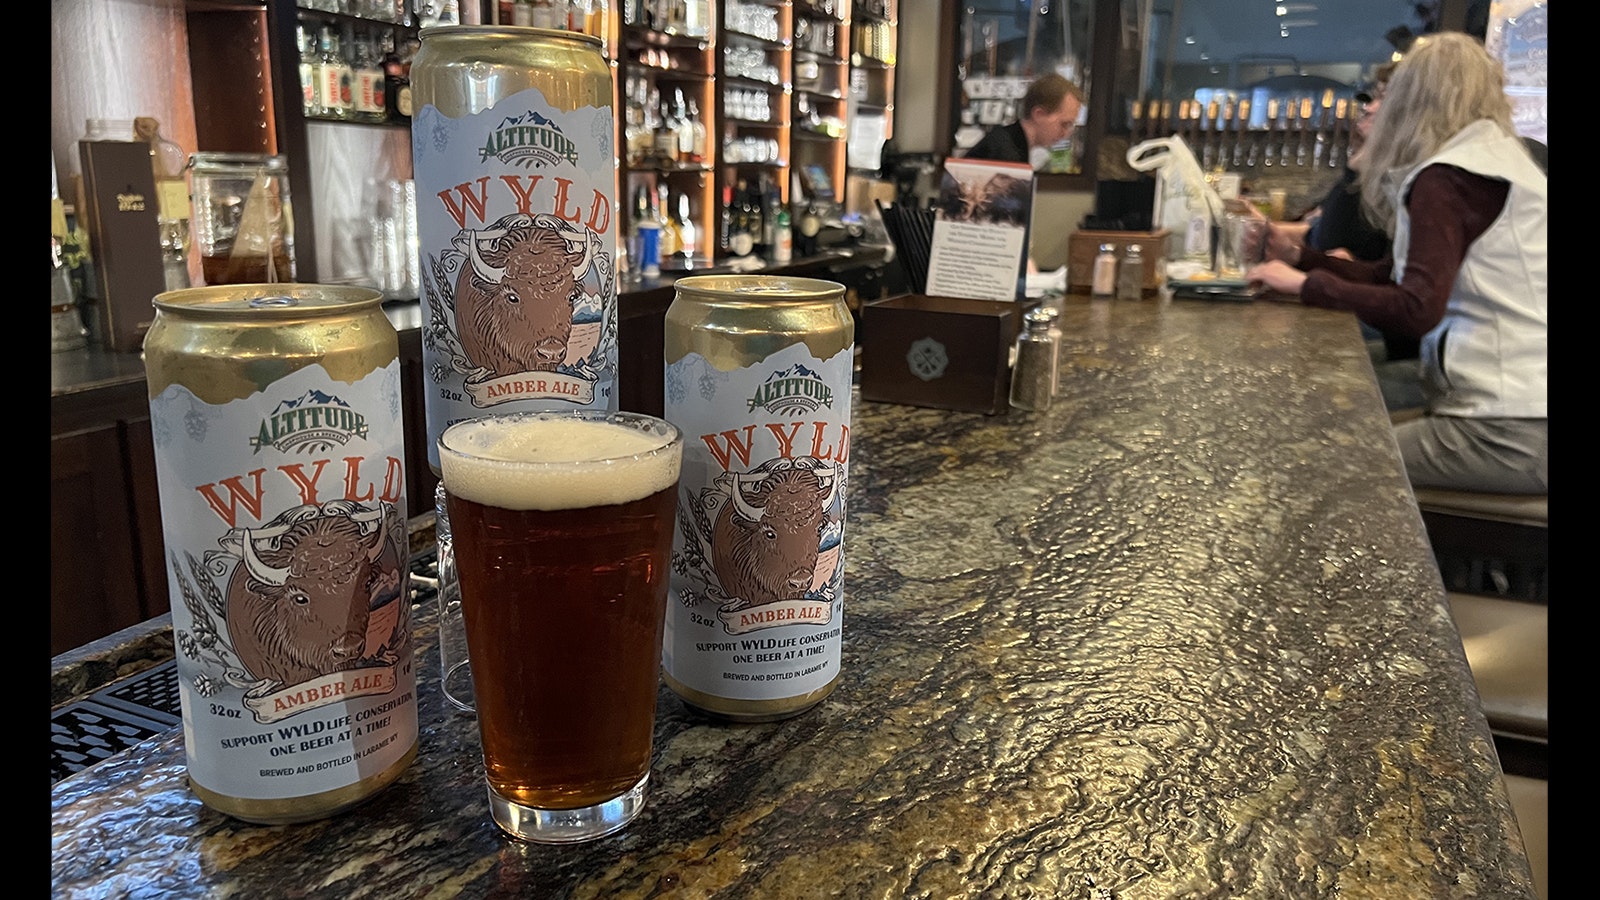 Wyld Amber Ale created in Laramie at Altitude Chophouse & Brewery donates a portion of sales to support Cowboy State wildlife.